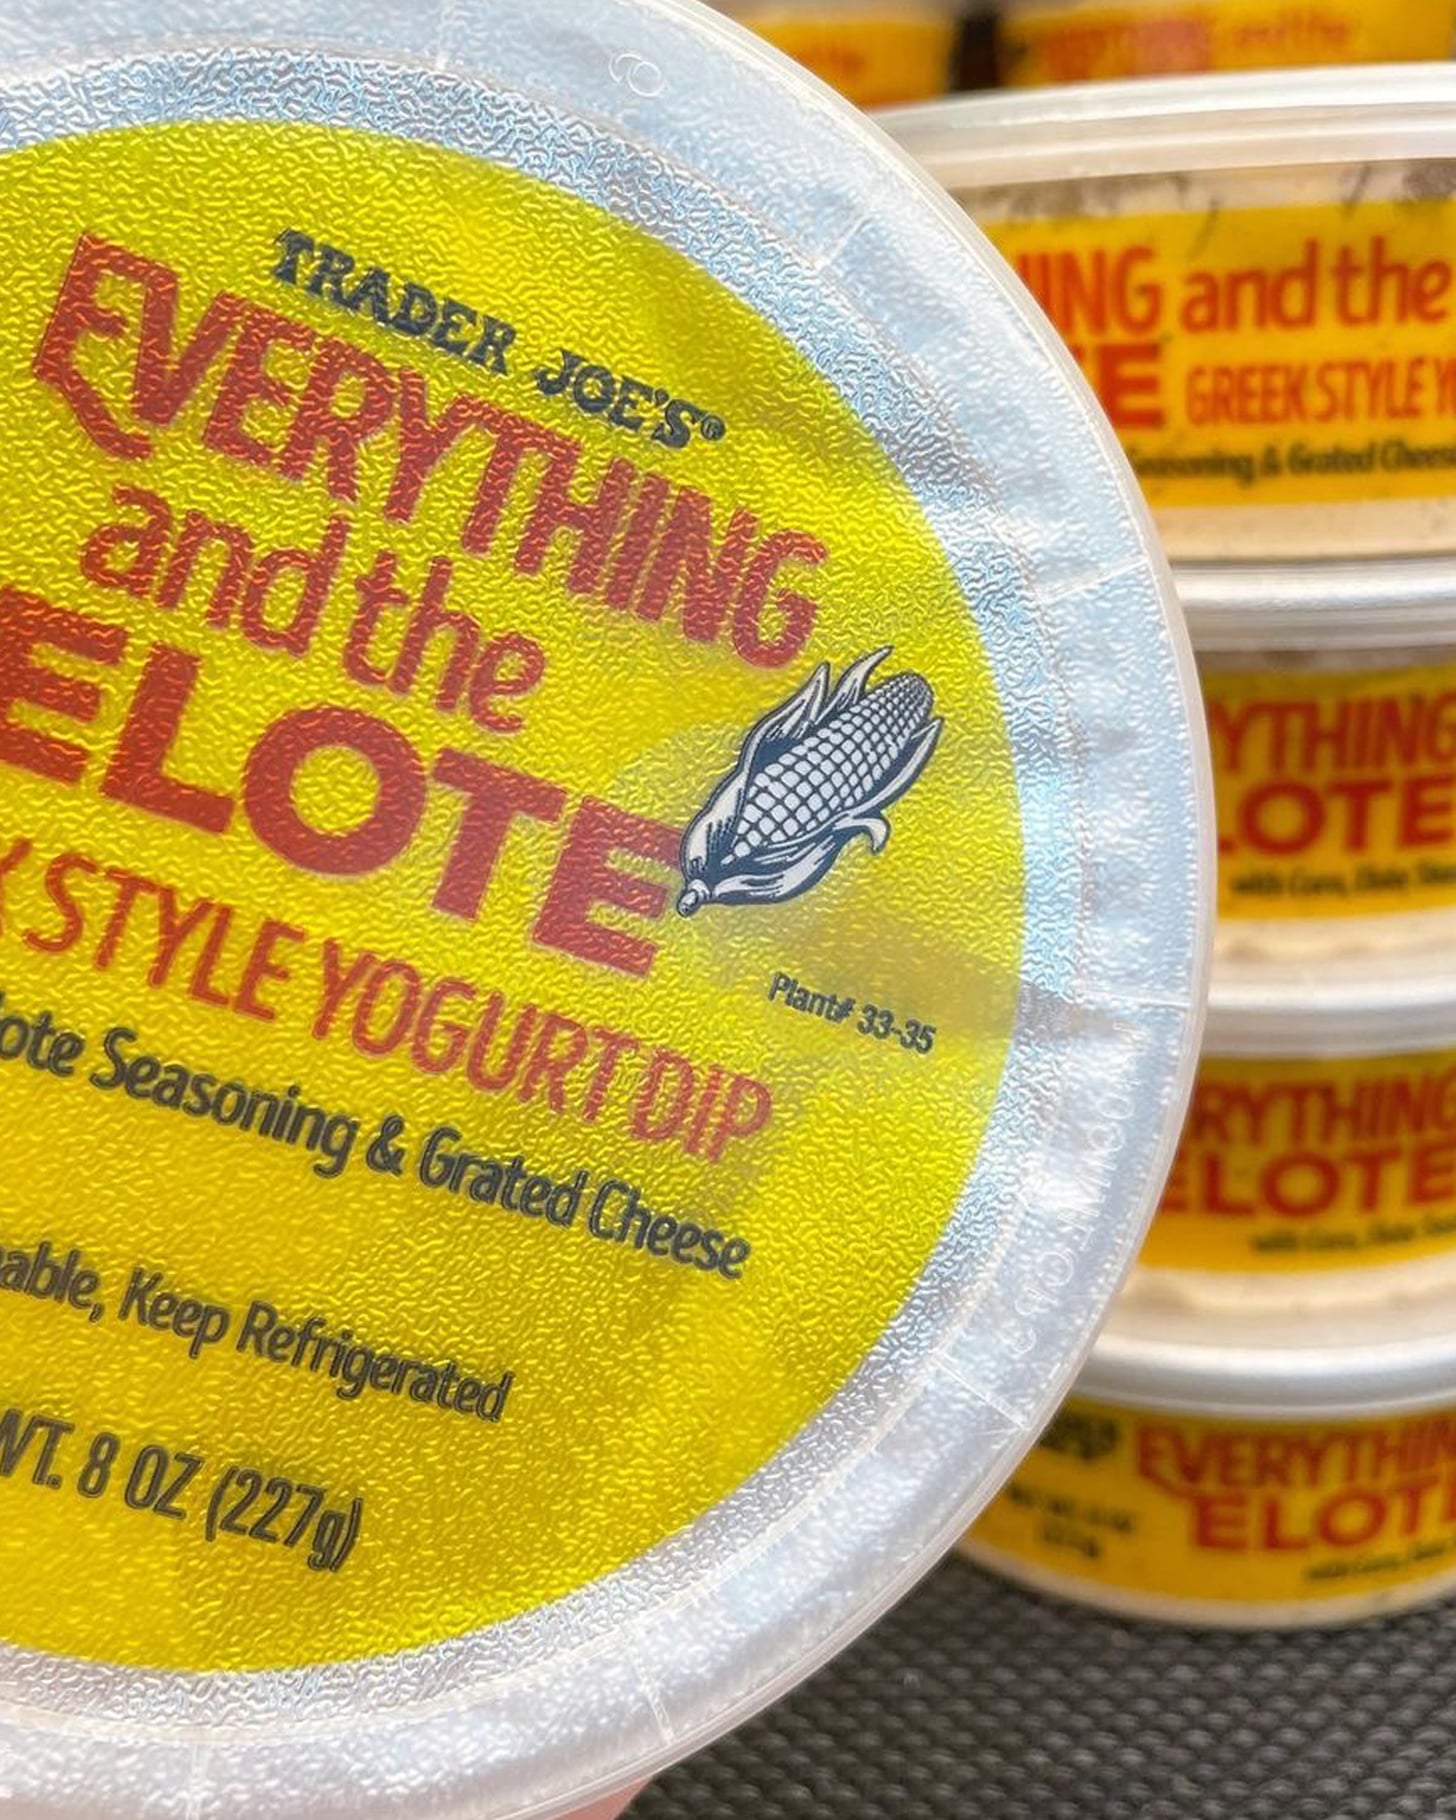 Trader Joe's Just Released Everything But the Elote Seasoning